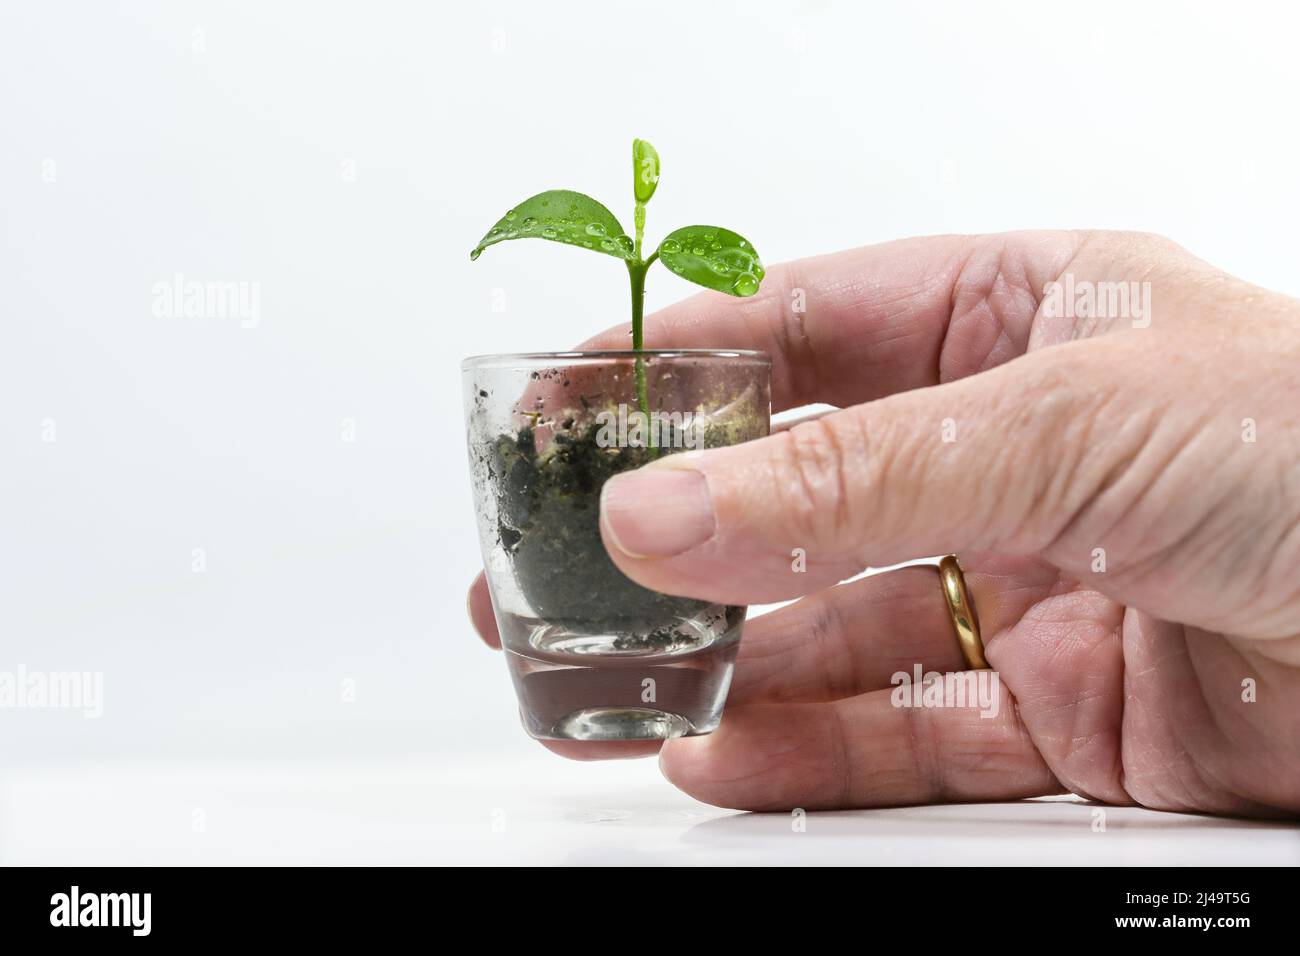 Hand holding a seedling of a lemon tree in a small glass, living plant as nature and green business metaphor for care, patience, growth and success, w Stock Photo